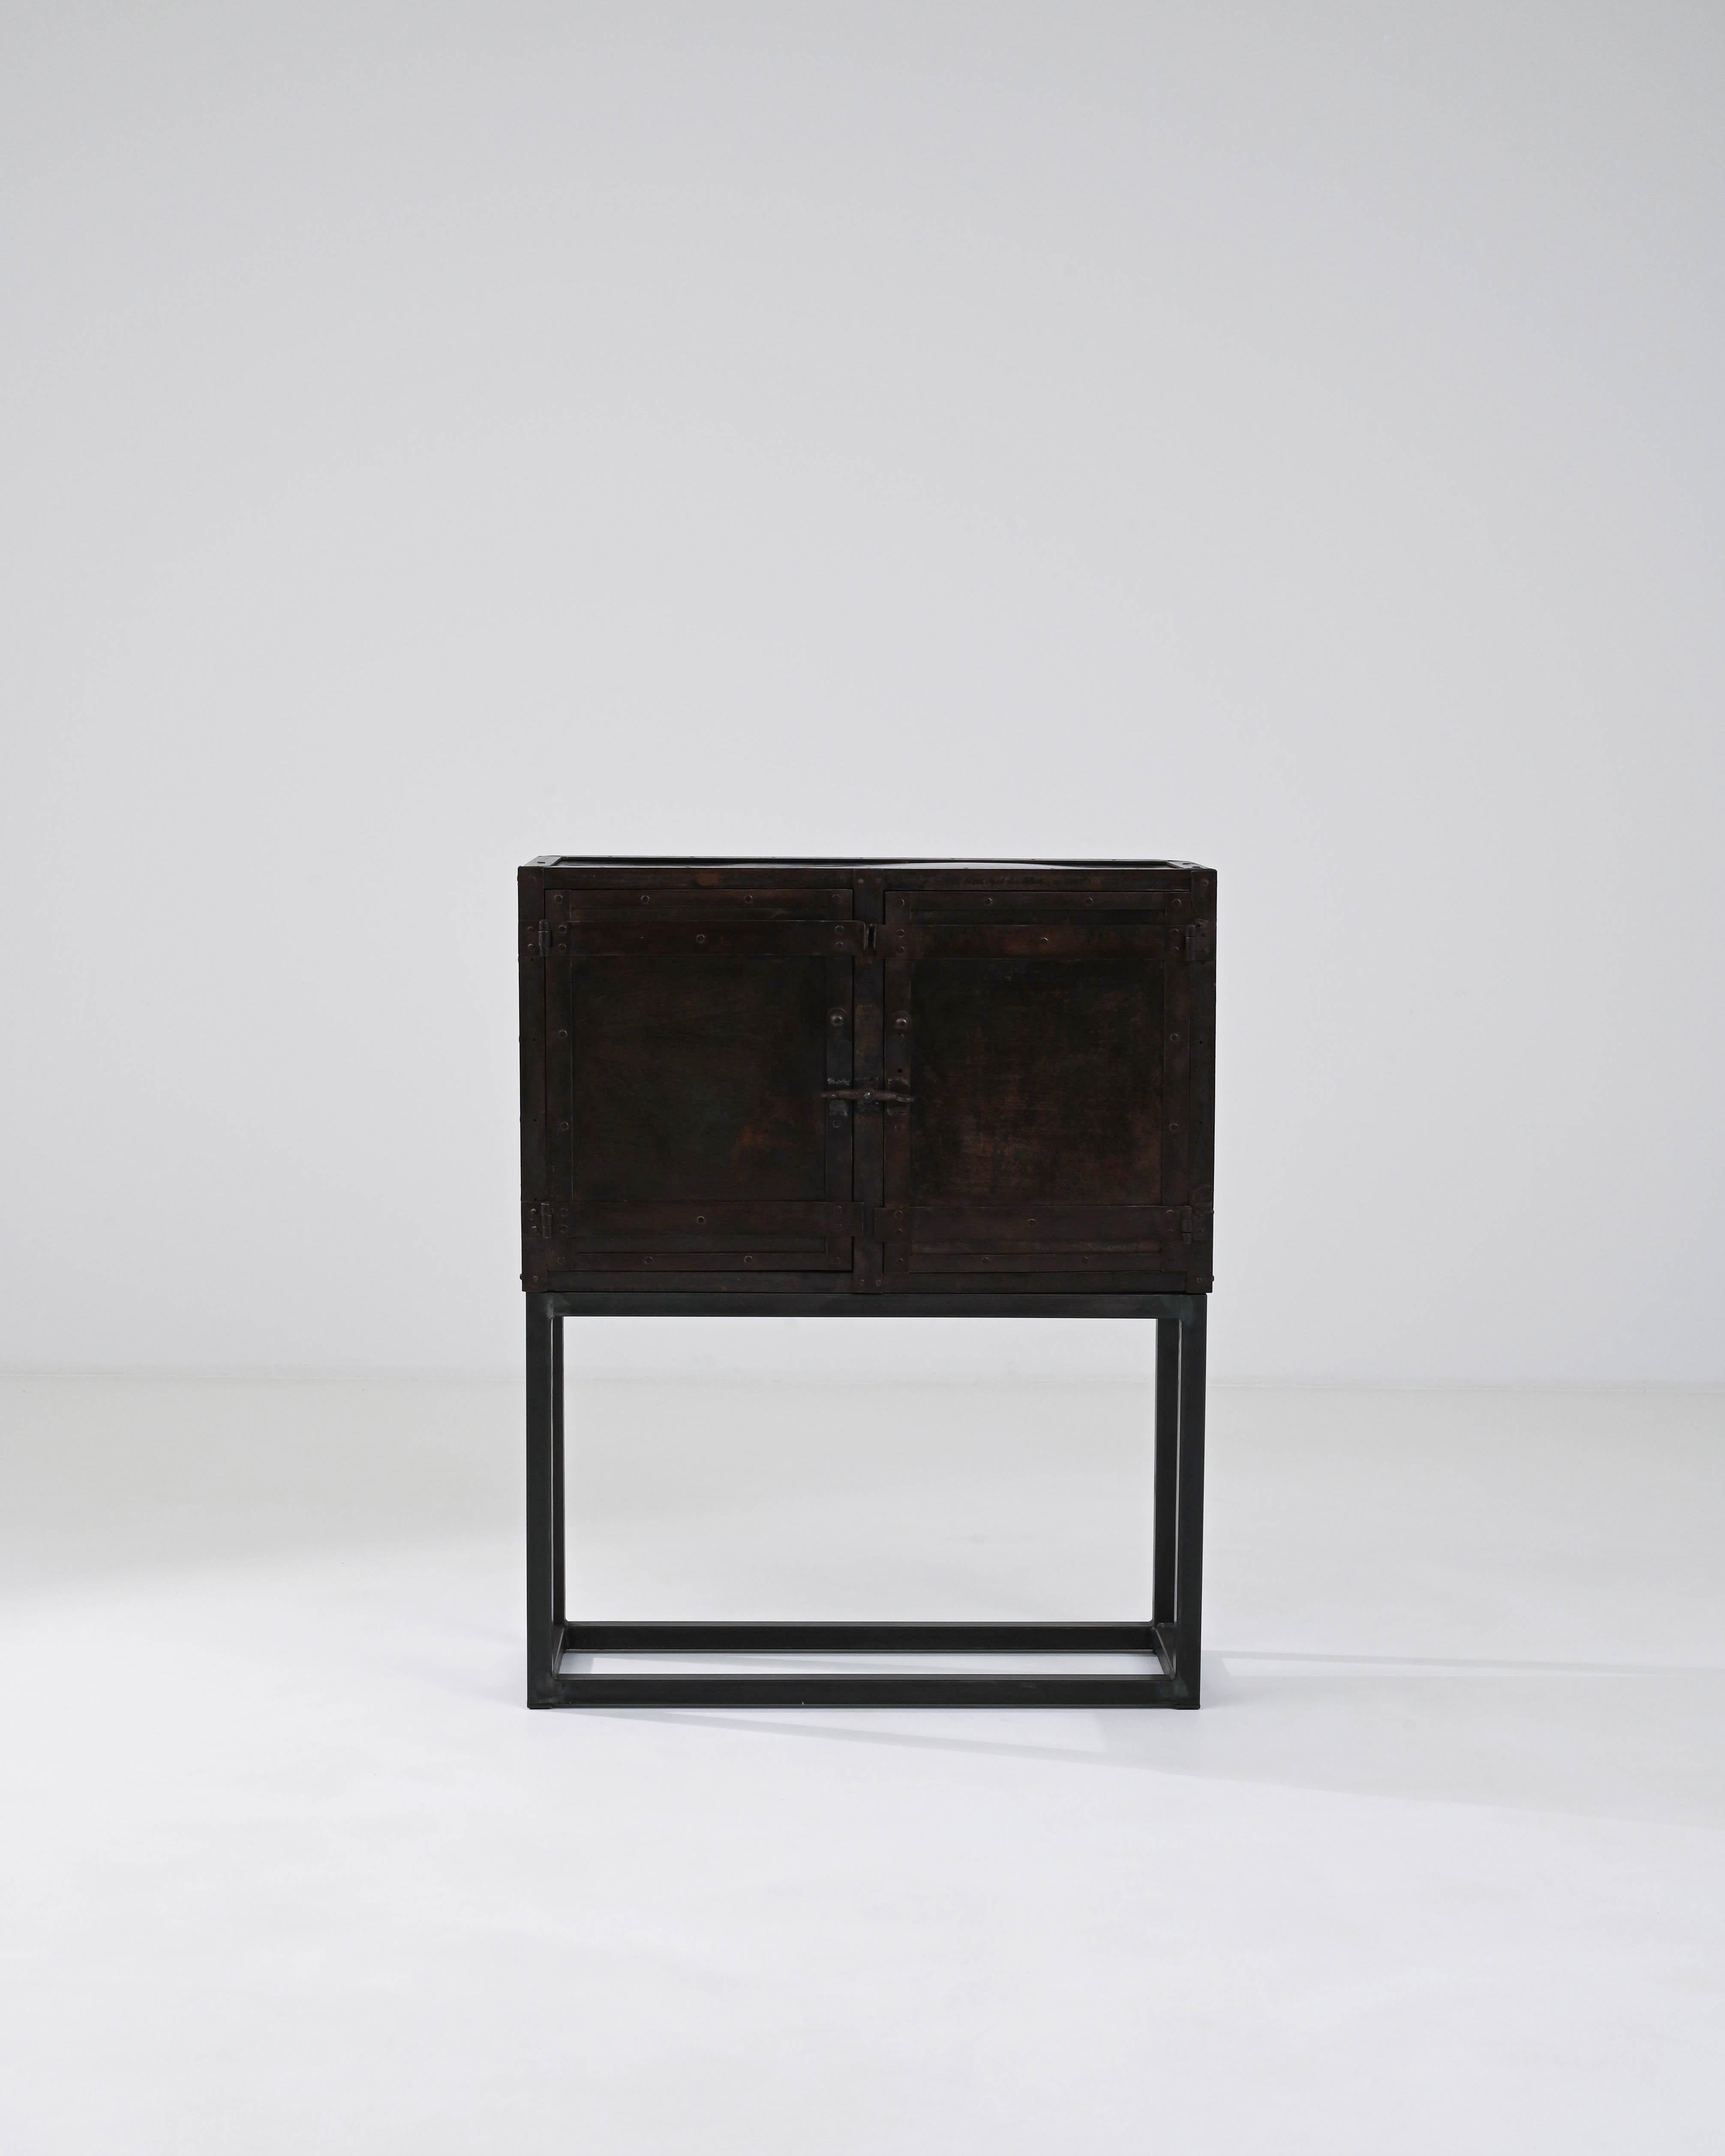 This 1920s French Metal Cabinet exudes the industrial elegance and robust character of early 20th-century design. Its minimalist metal framework provides a stark, stylish contrast to the distressed metal enclosure, creating a visual narrative of